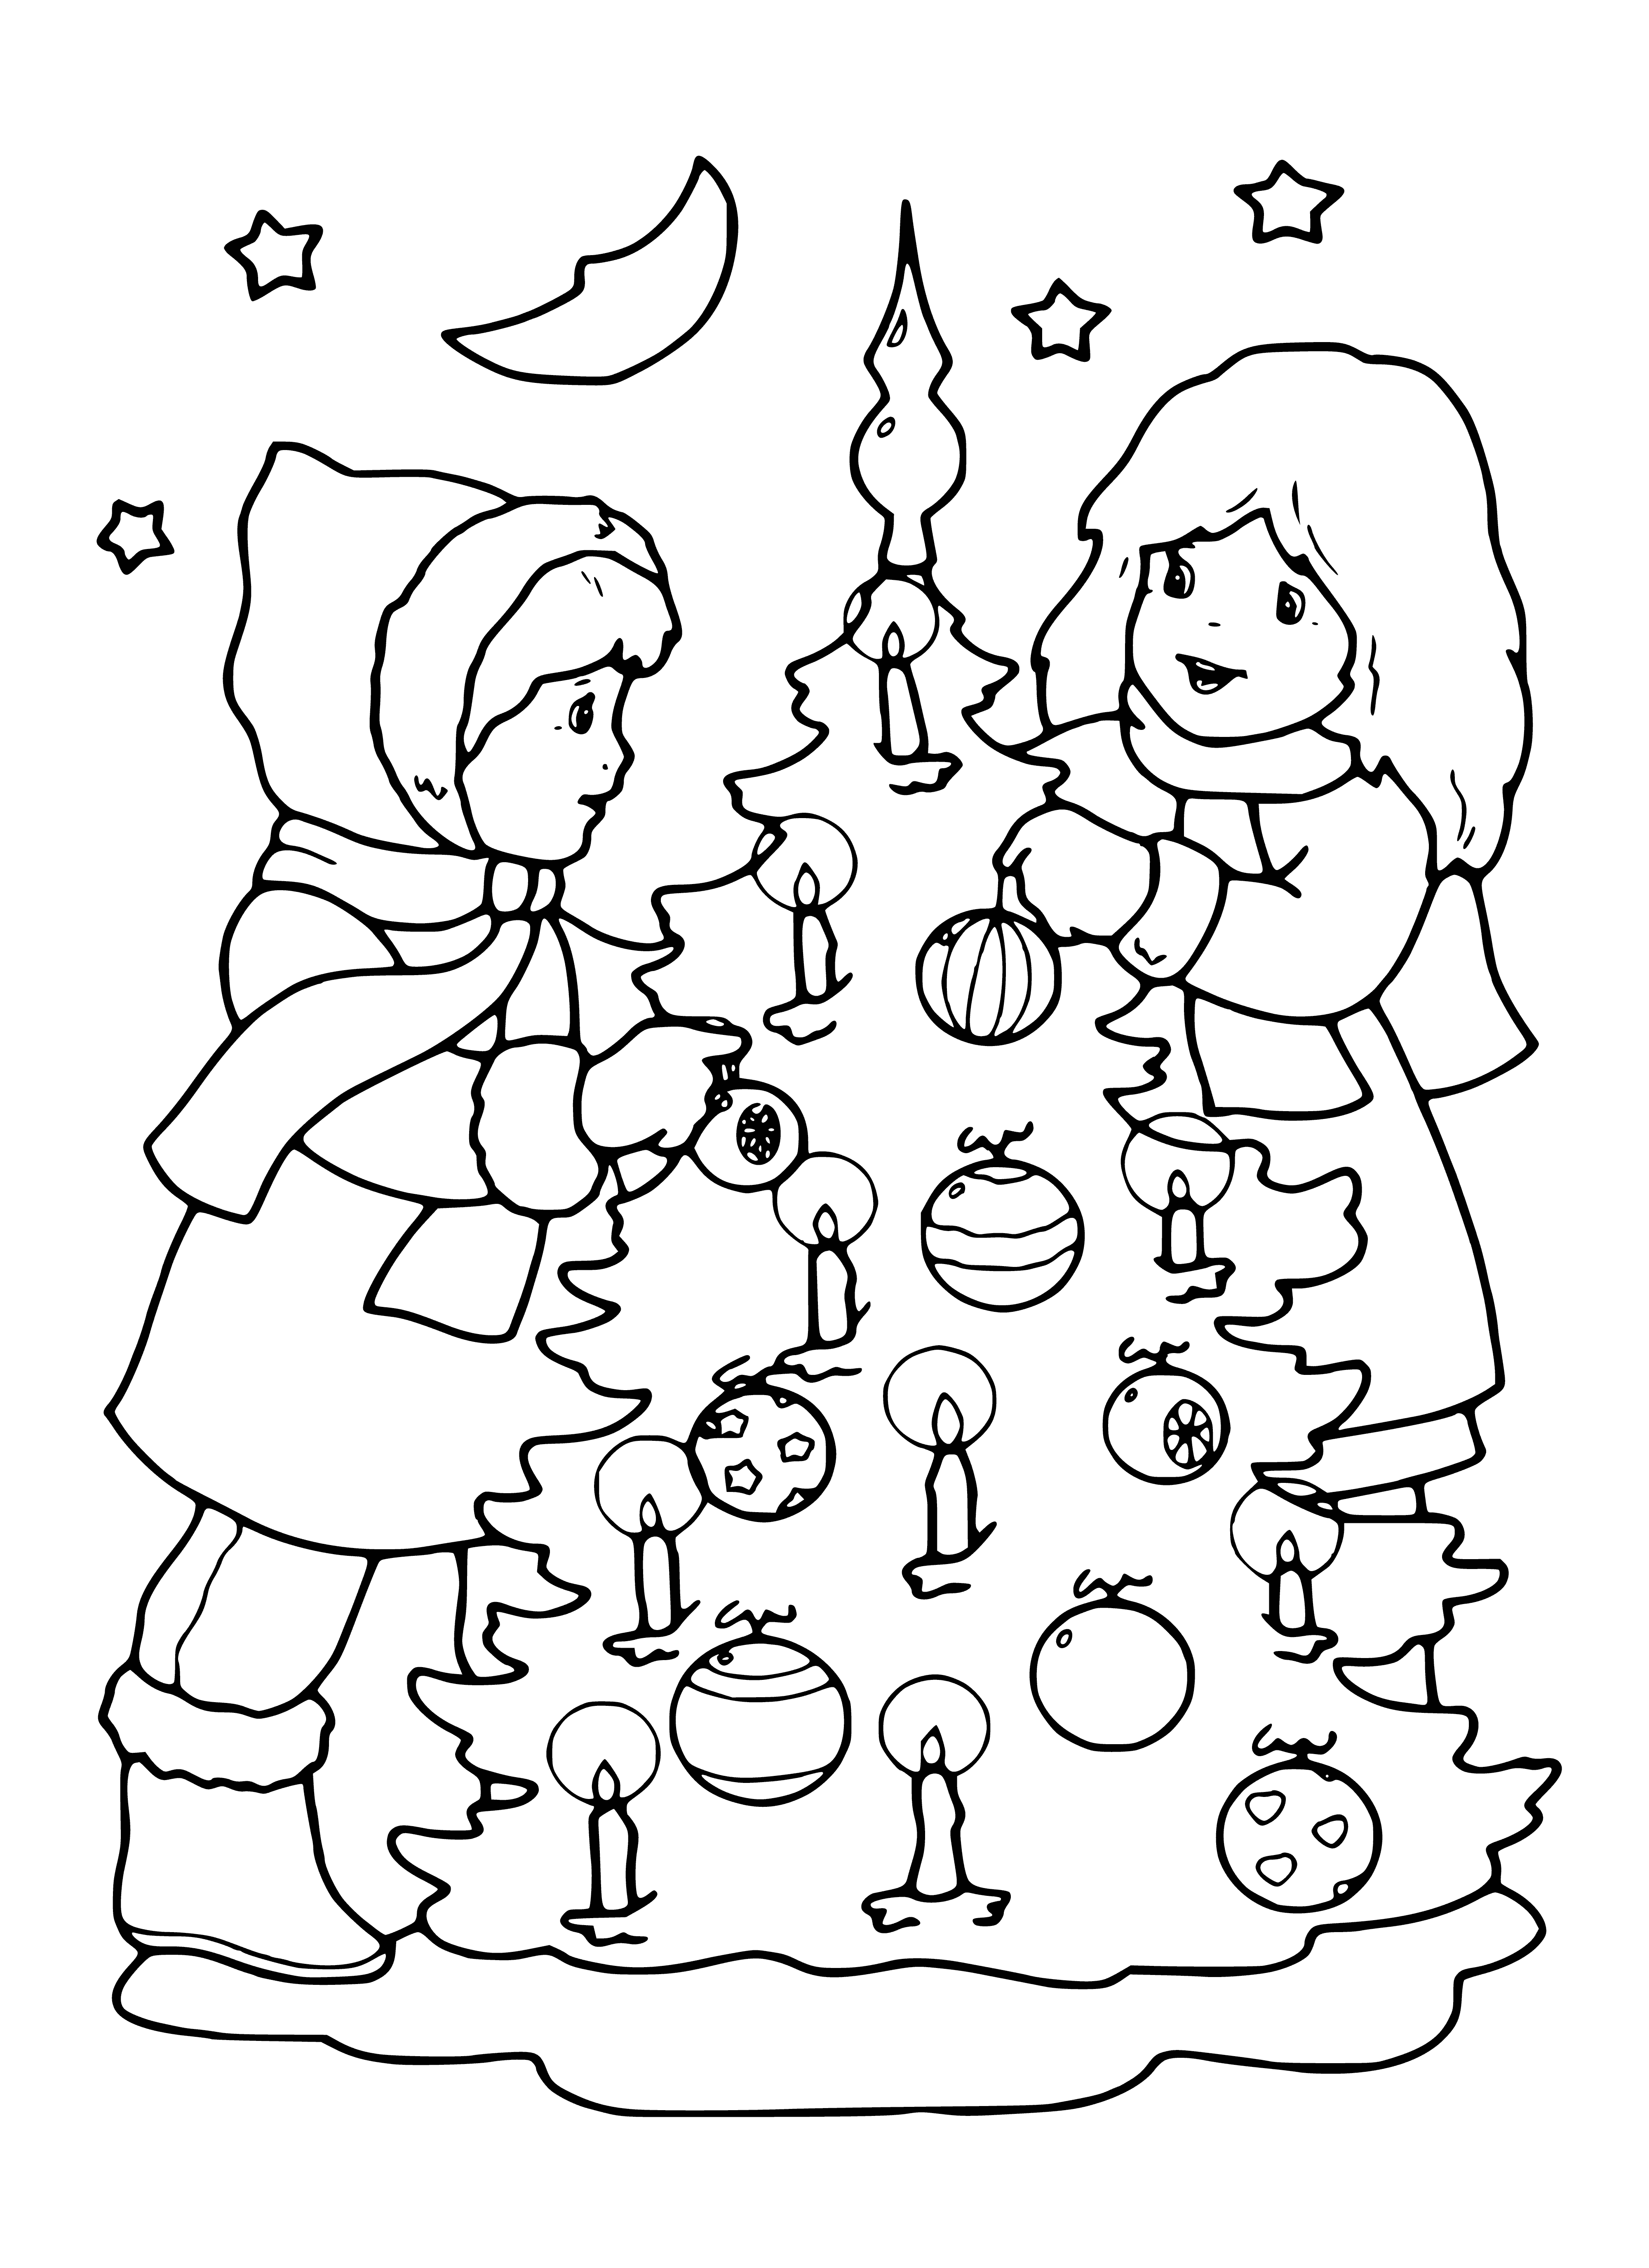 coloring page: Children around Xmas tree, holding presents, ornaments, garland. Tree full of colorful lights and ornaments.